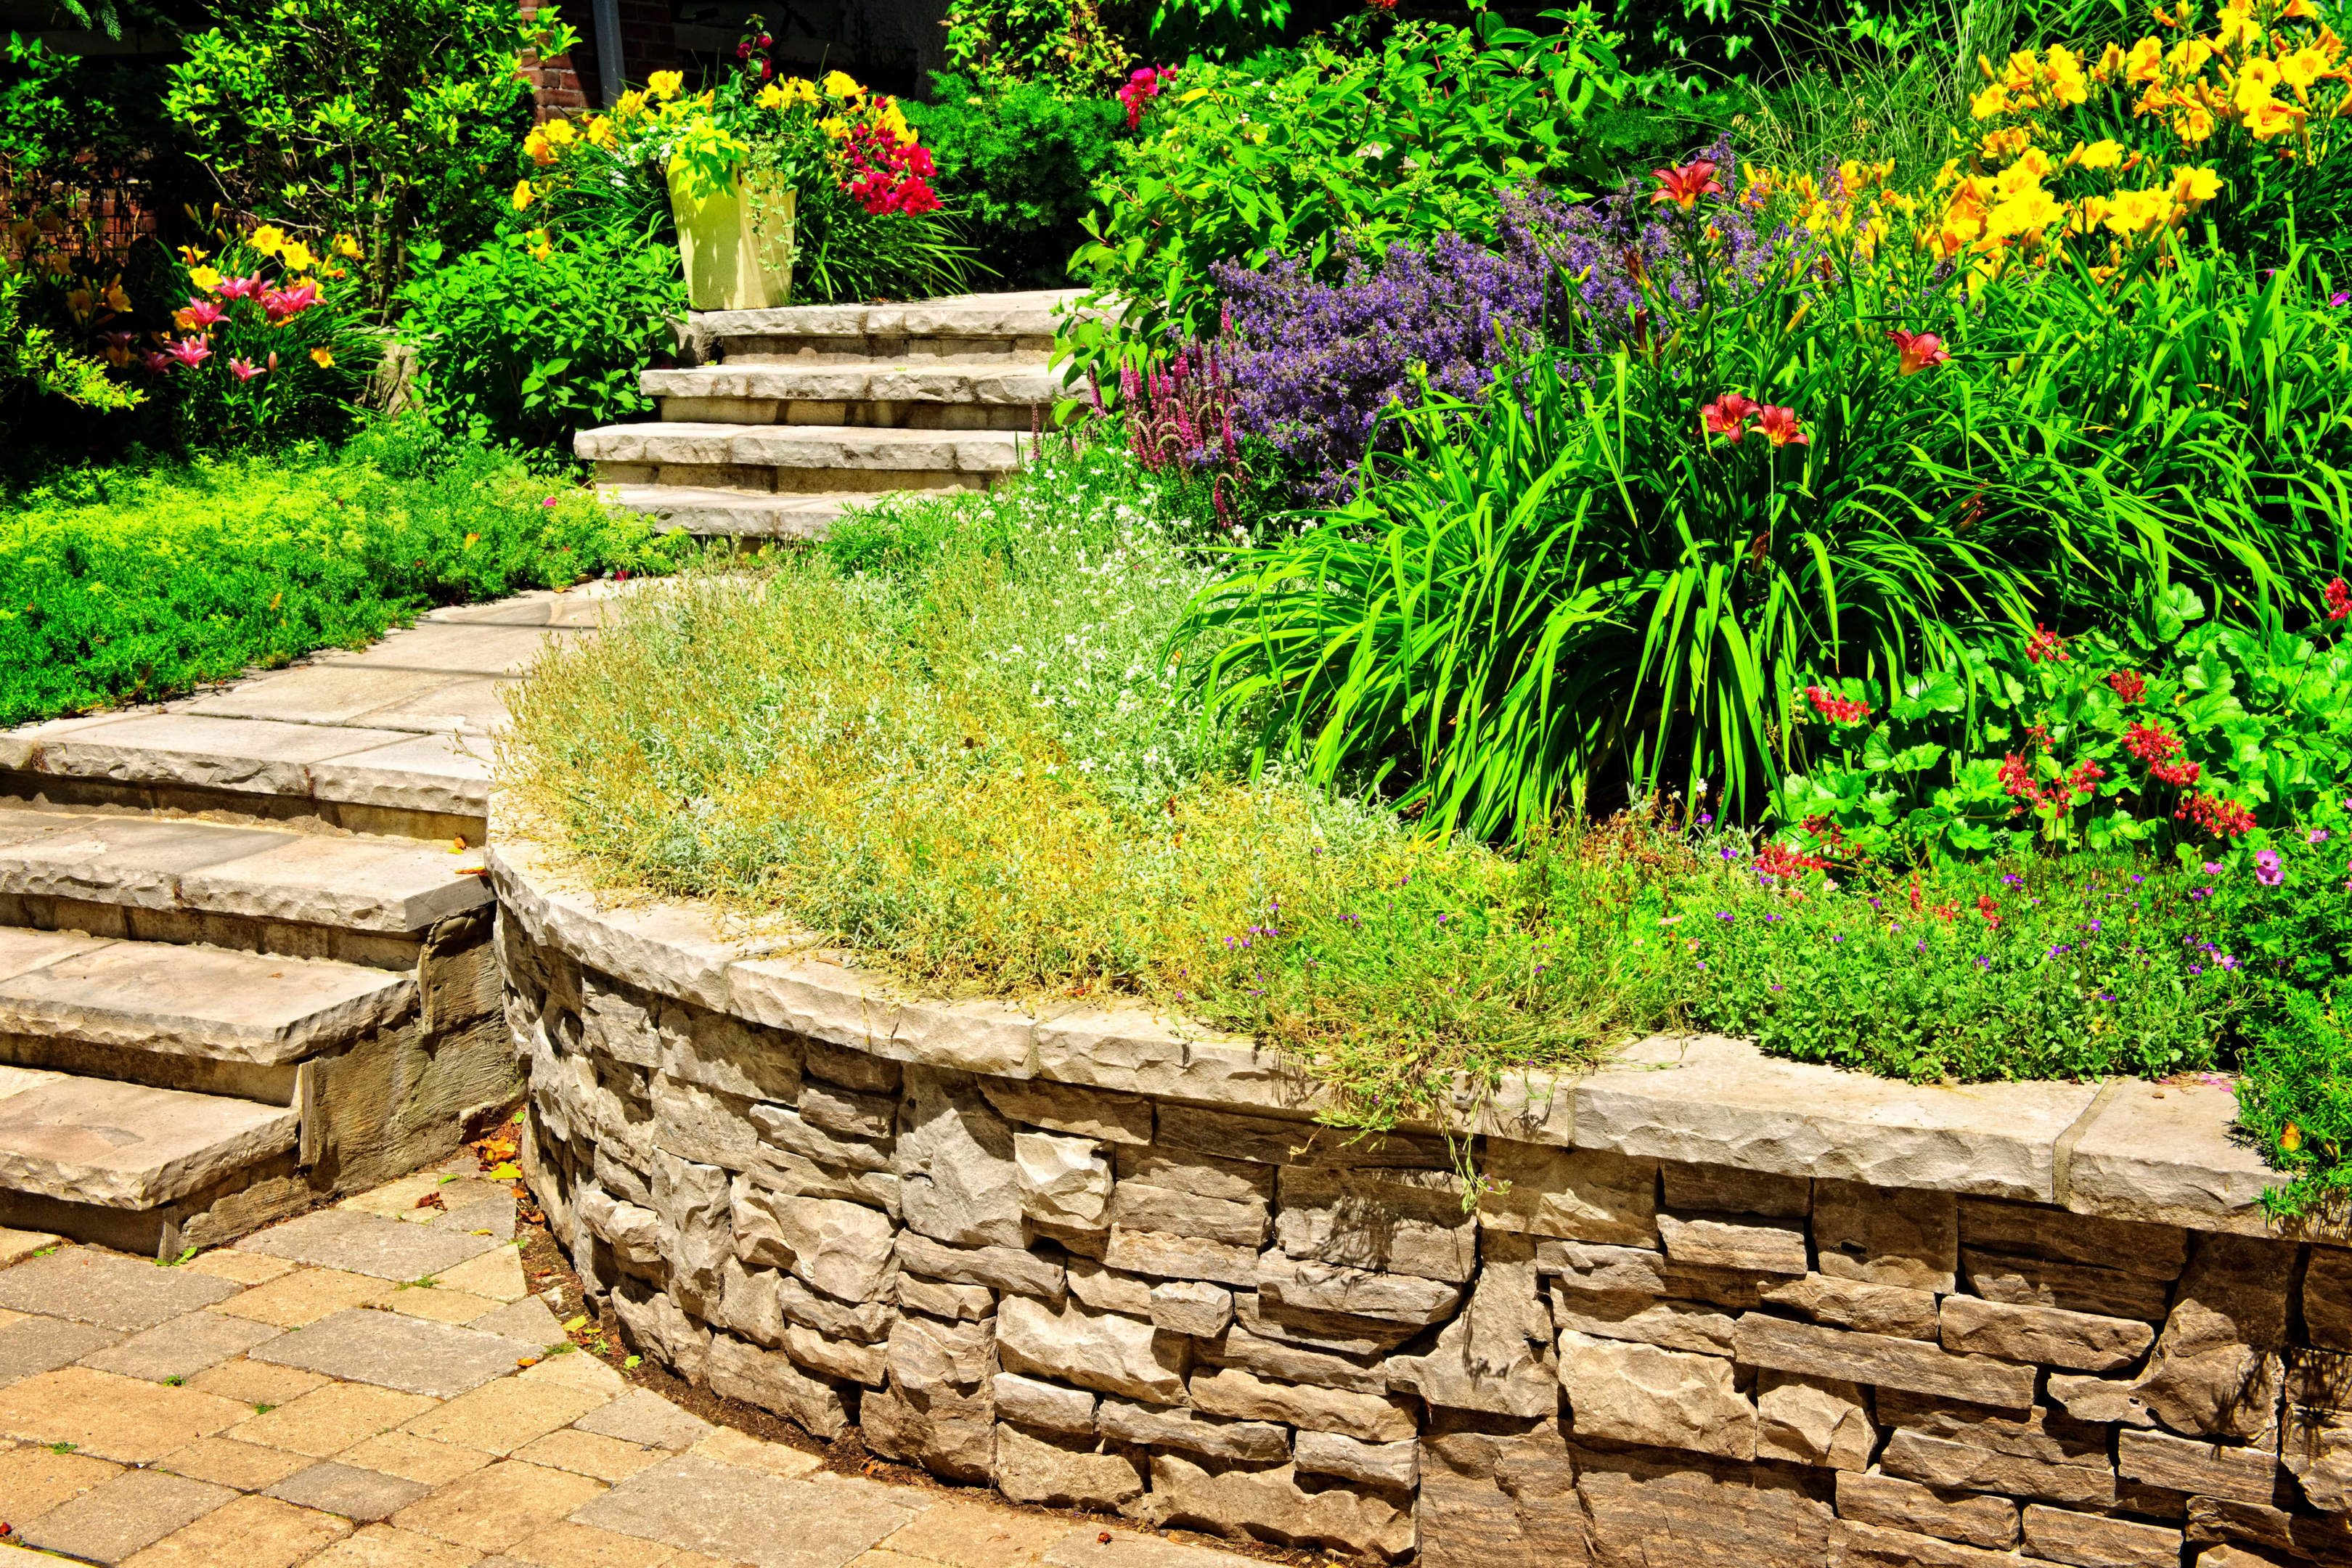 This gorgeous stone wall matches the stairs and provides the perfect frameowrk for a garden